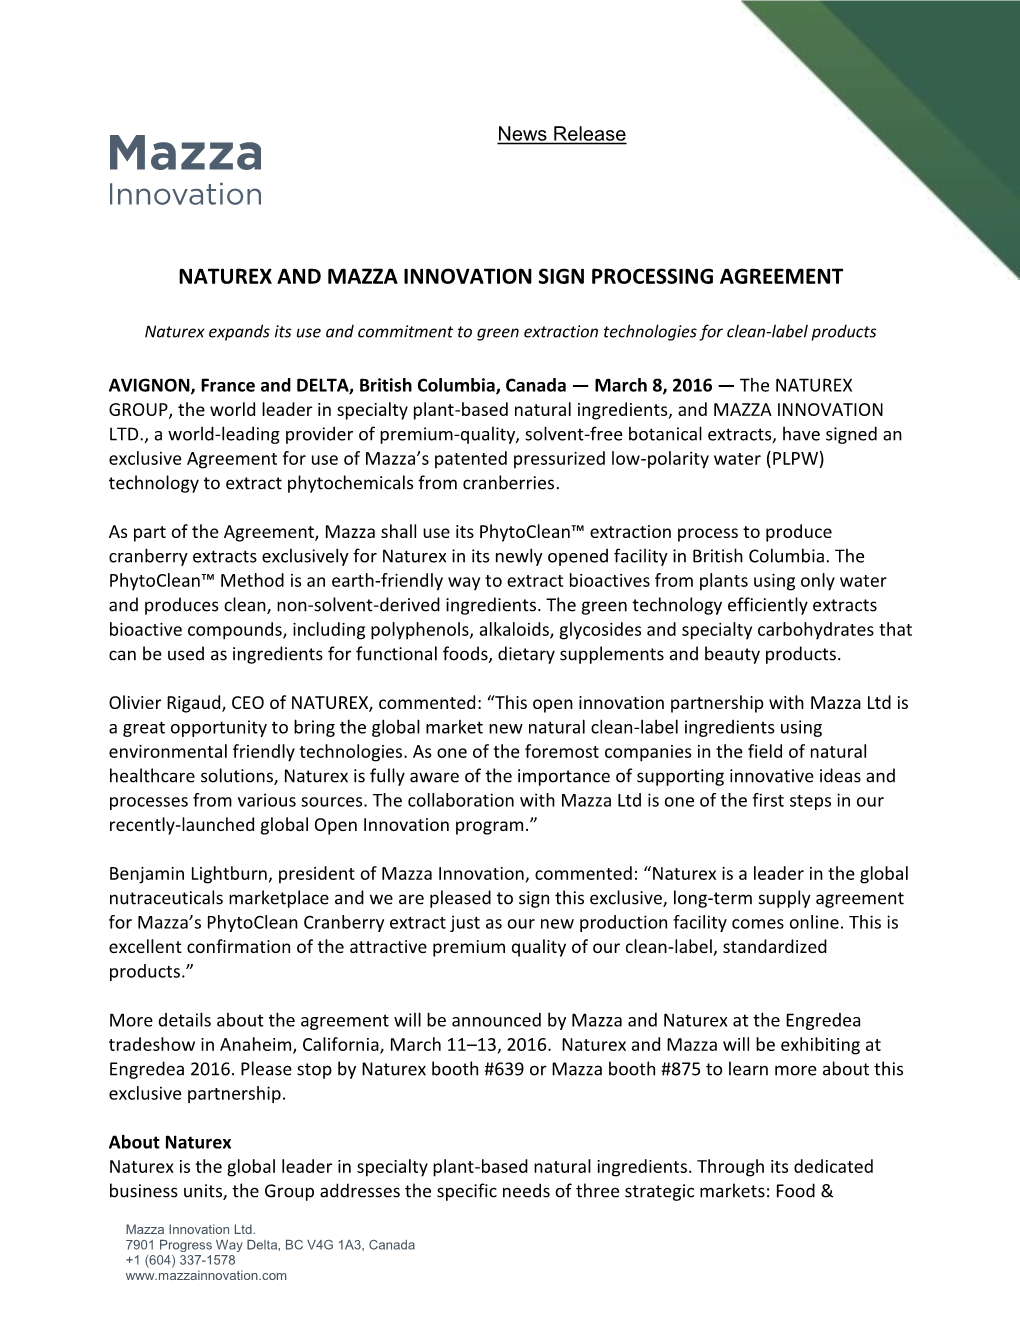 Naturex and Mazza Innovation Sign Processing Agreement